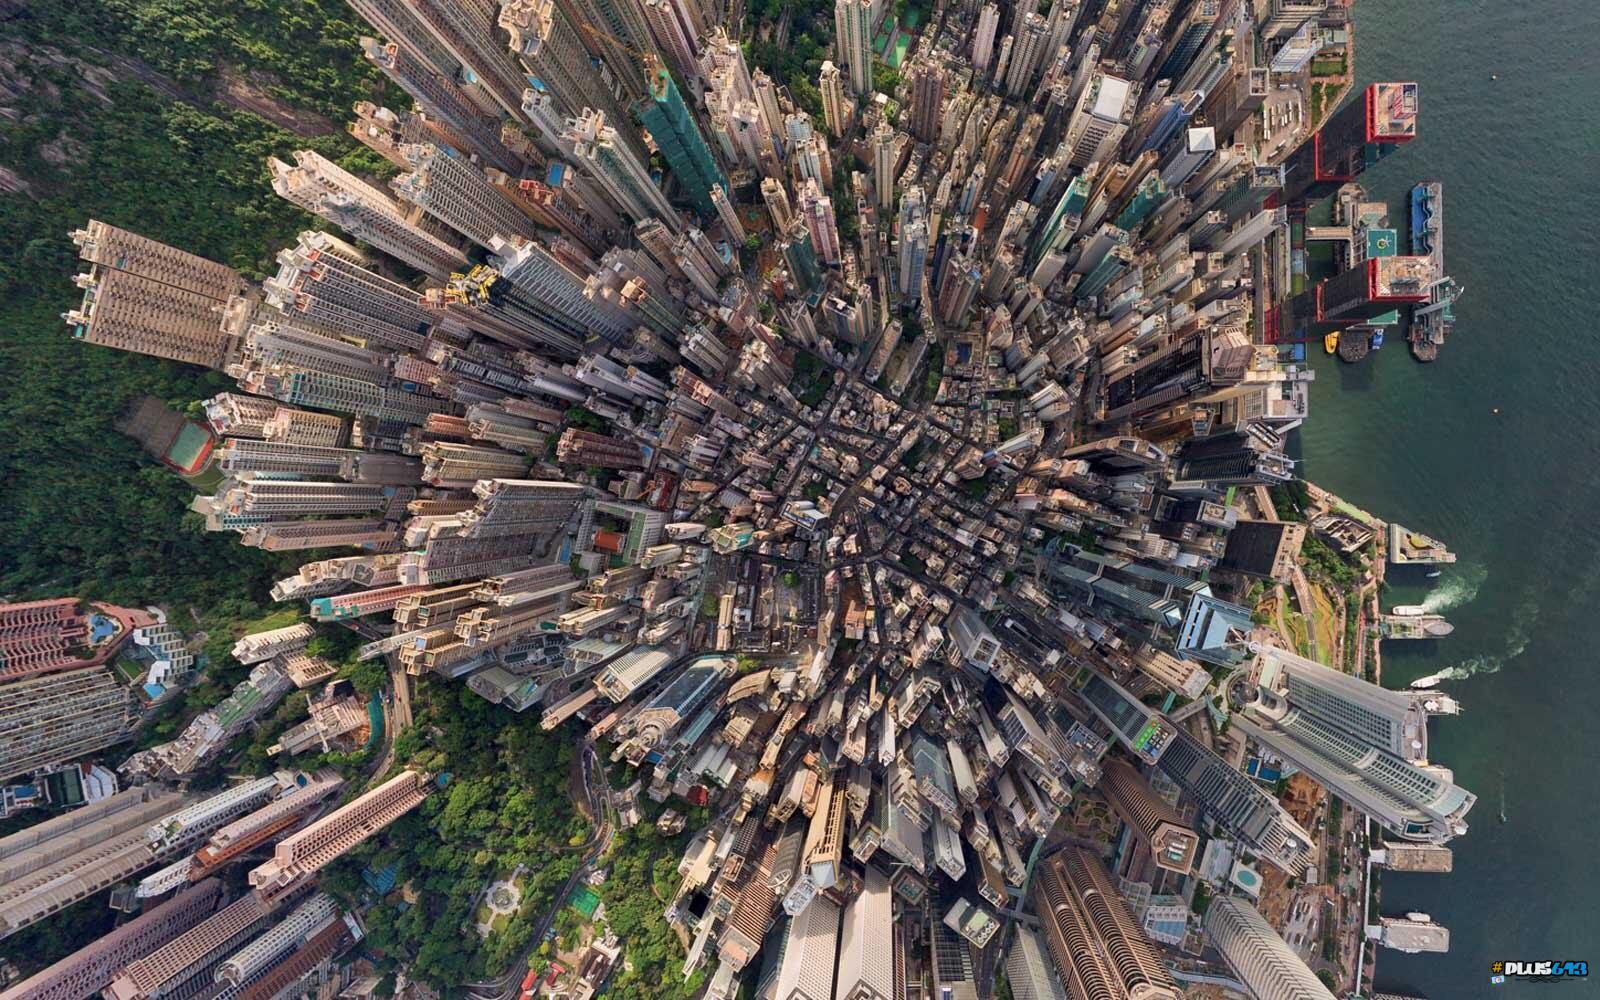 plus613 - culture in the blender - Aerial view of Hong Kong